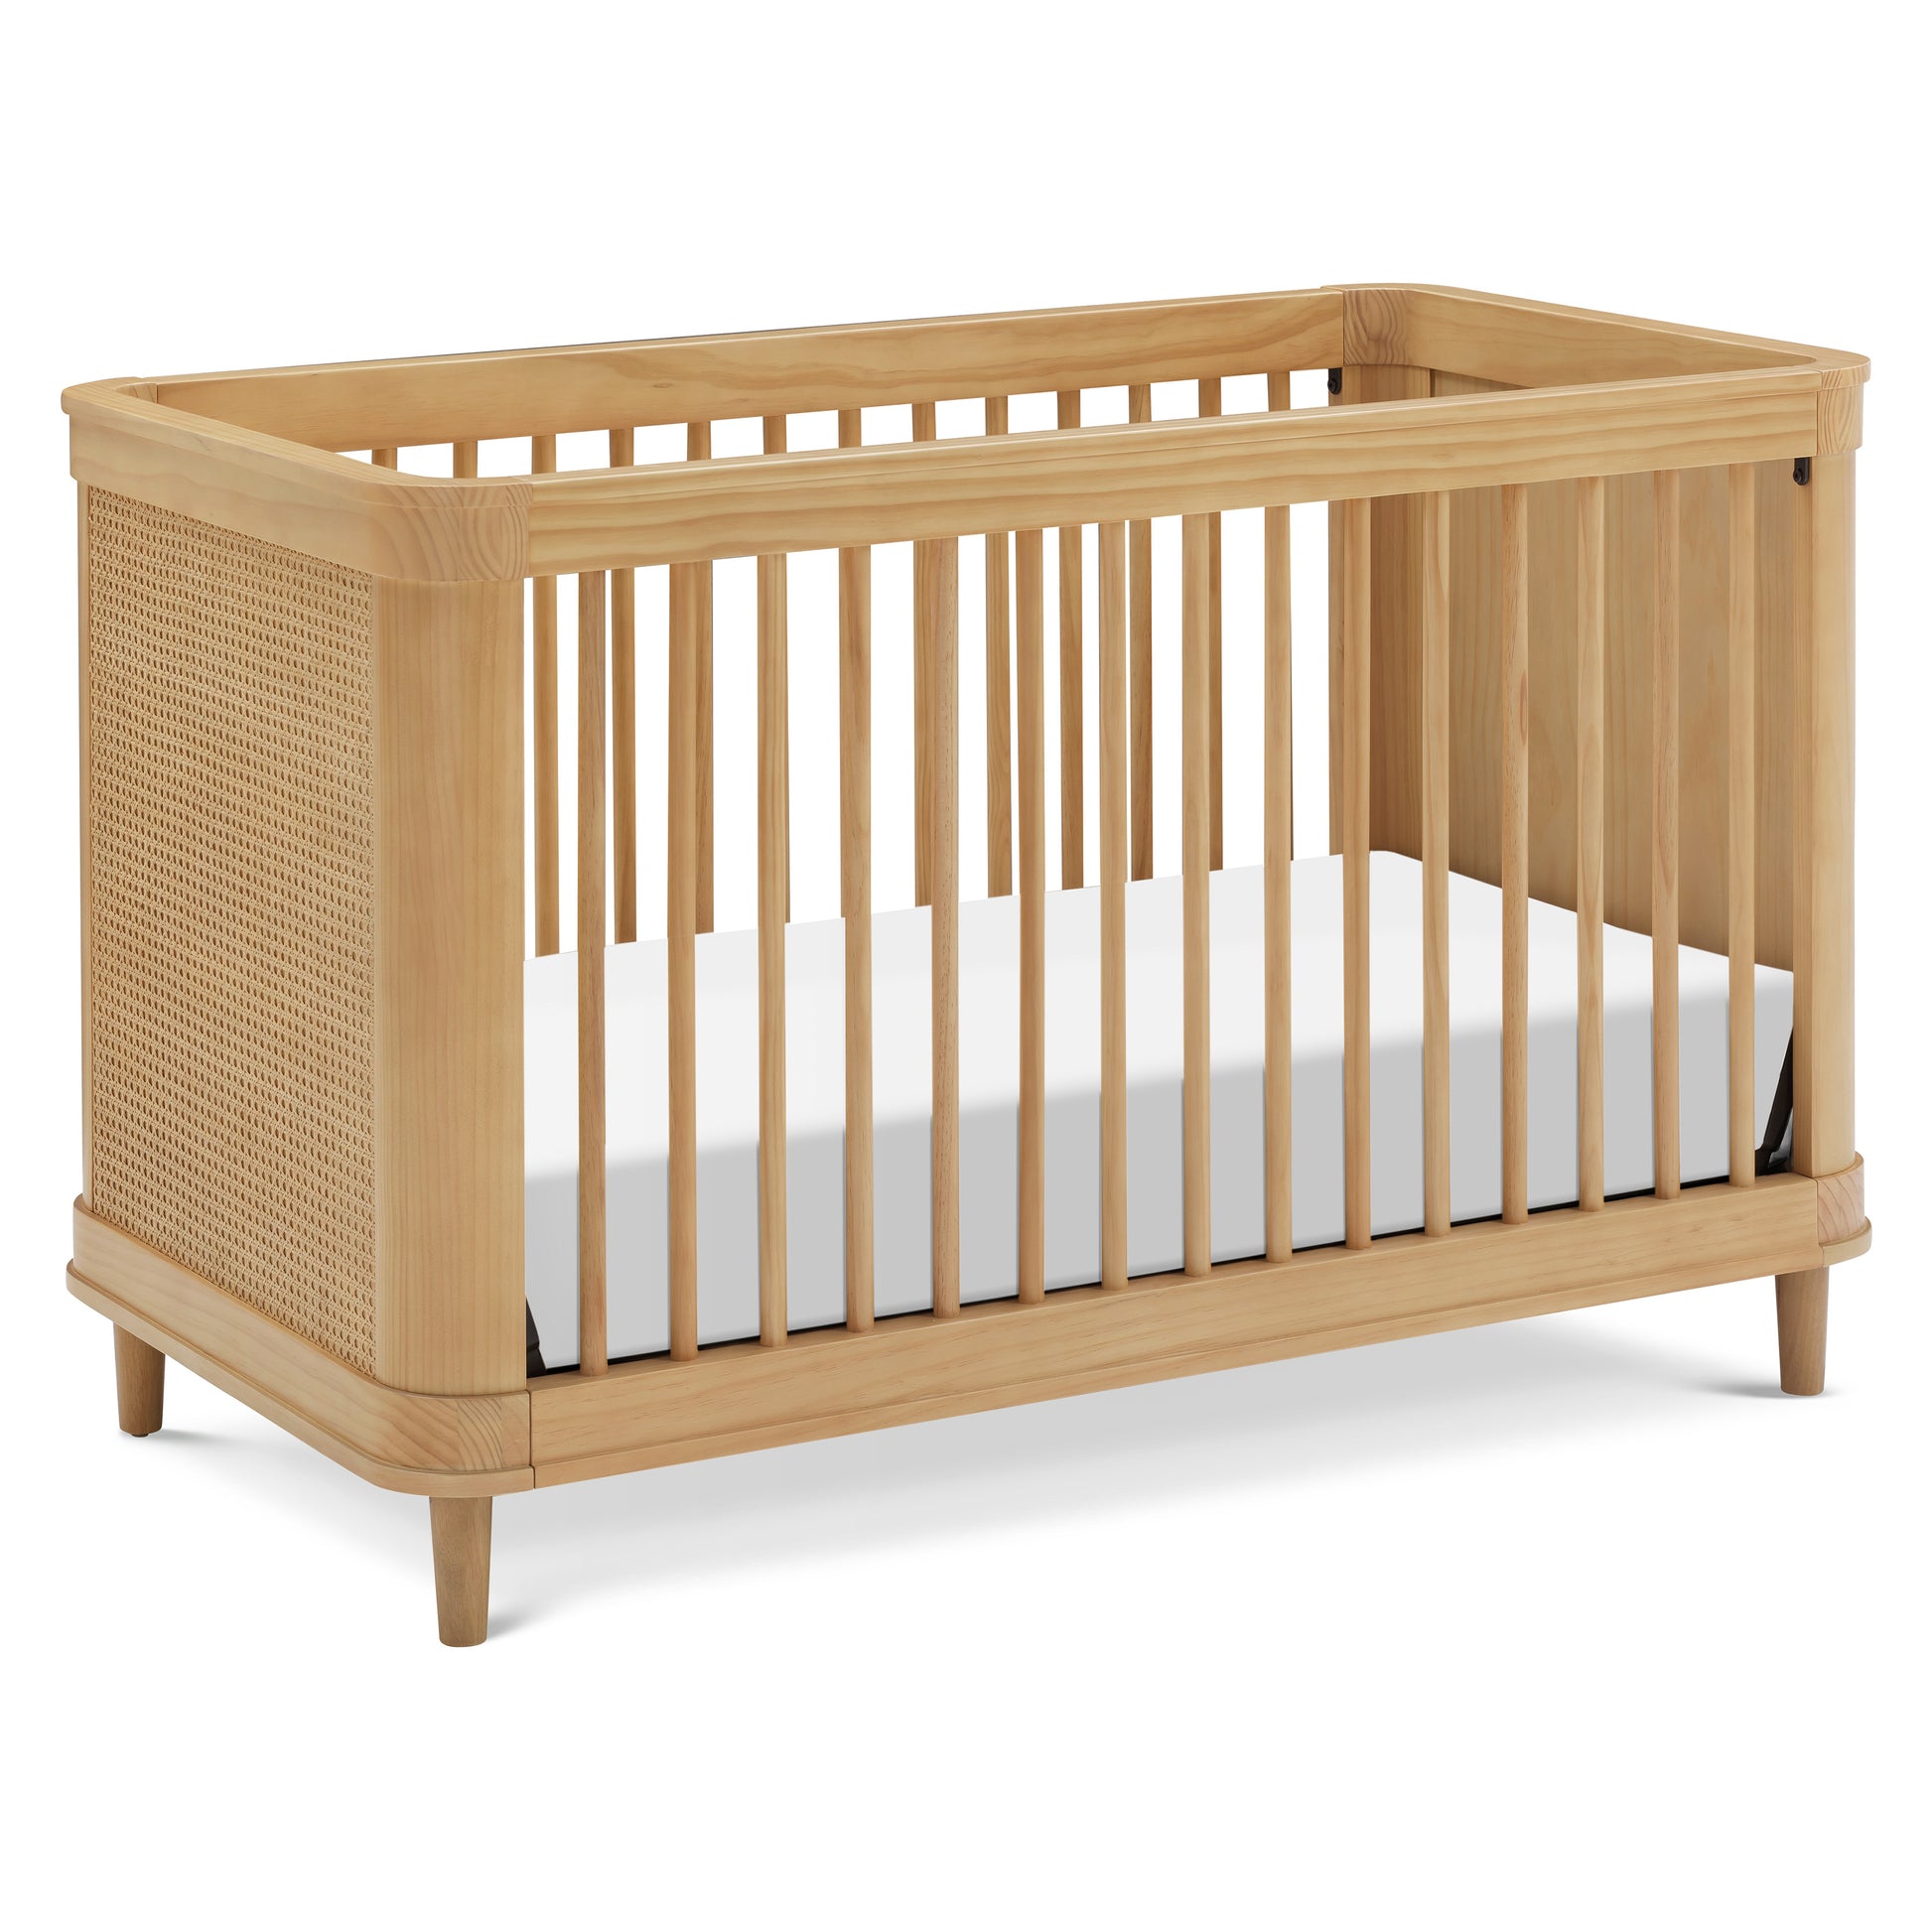 M23701HYHC,Marin with Cane 3-in-1 Convertible Crib in Honey and Honey Cane